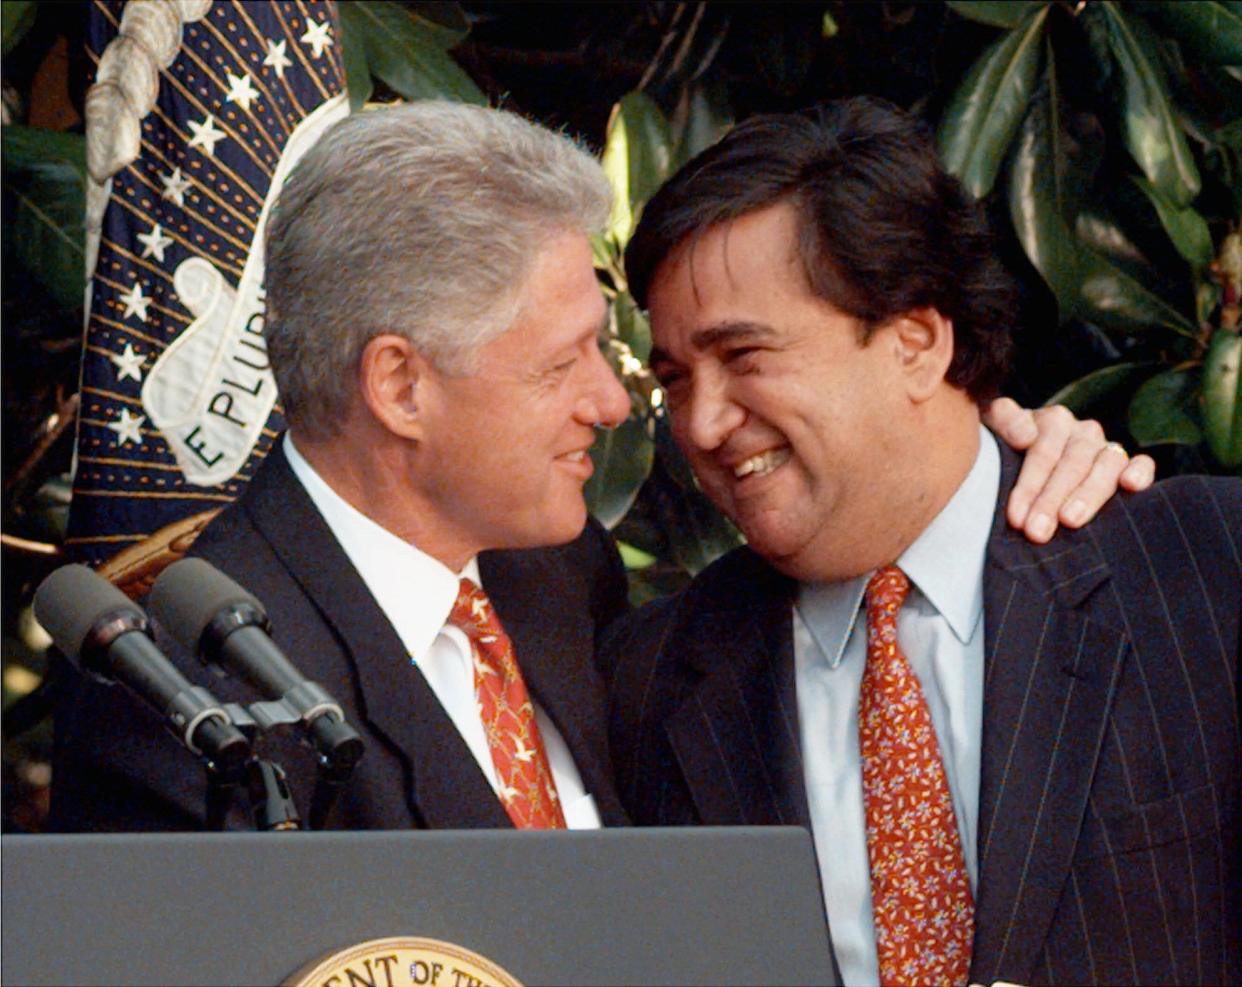 President Clinton, left, embraces Bill Richardson, then U.S. Ambassador to the United Nations, at a White House Rose Garden ceremony June 18, 1998. Clinton announced that Richardson was going to become the new Secretary of Energy.